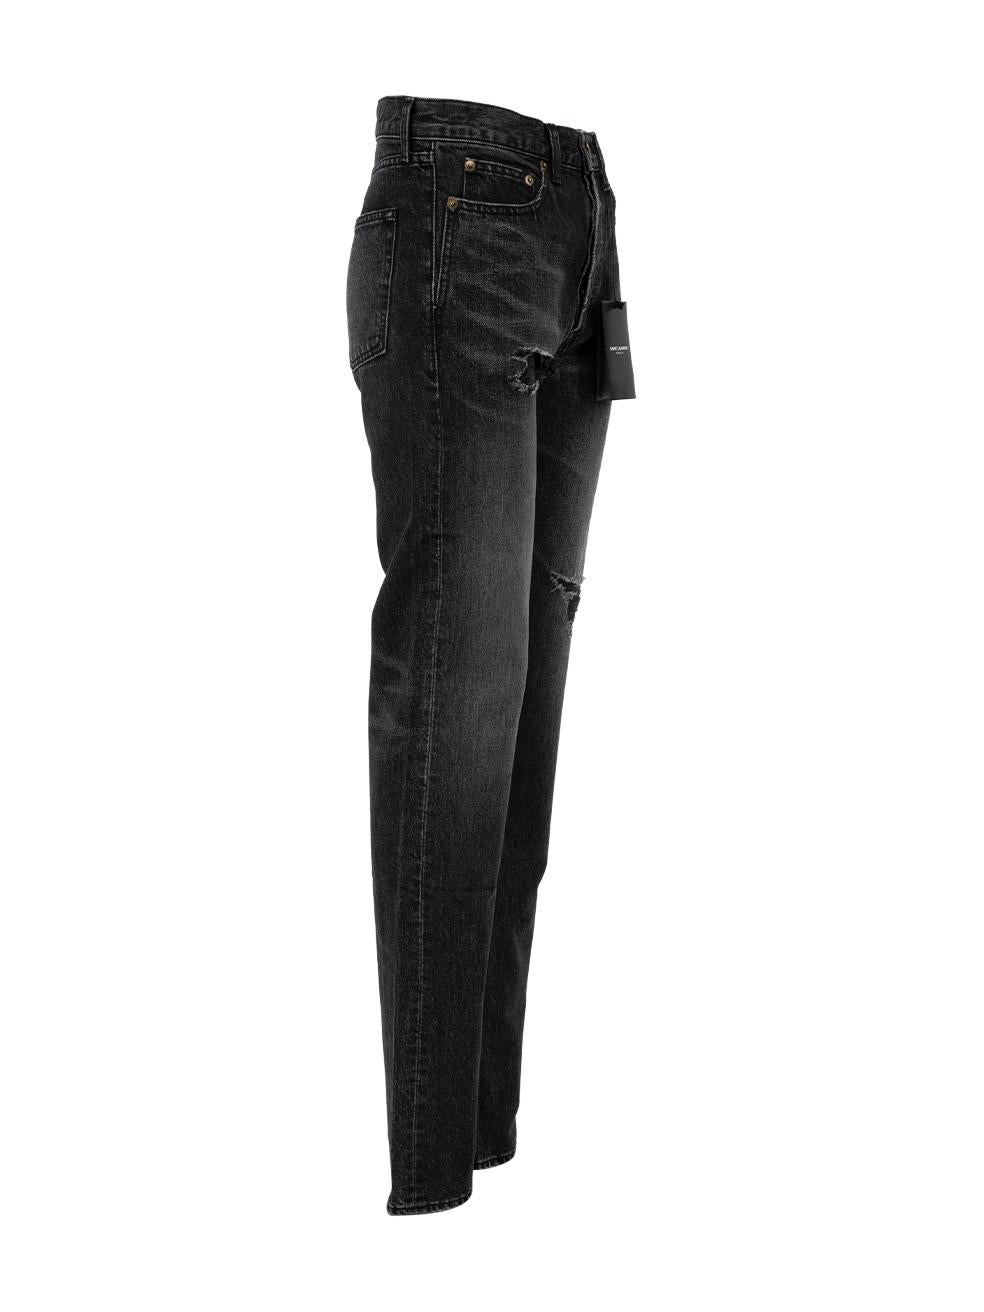 CONDITION is Never worn, with tags. No visible wear to jeans is evident on this new Saint Laurent designer resale item. Details 2018 Charcoal grey Denim Jeans Low rise Slim fit Regular length Distressed design Front buttons closure Belt hoops 2x